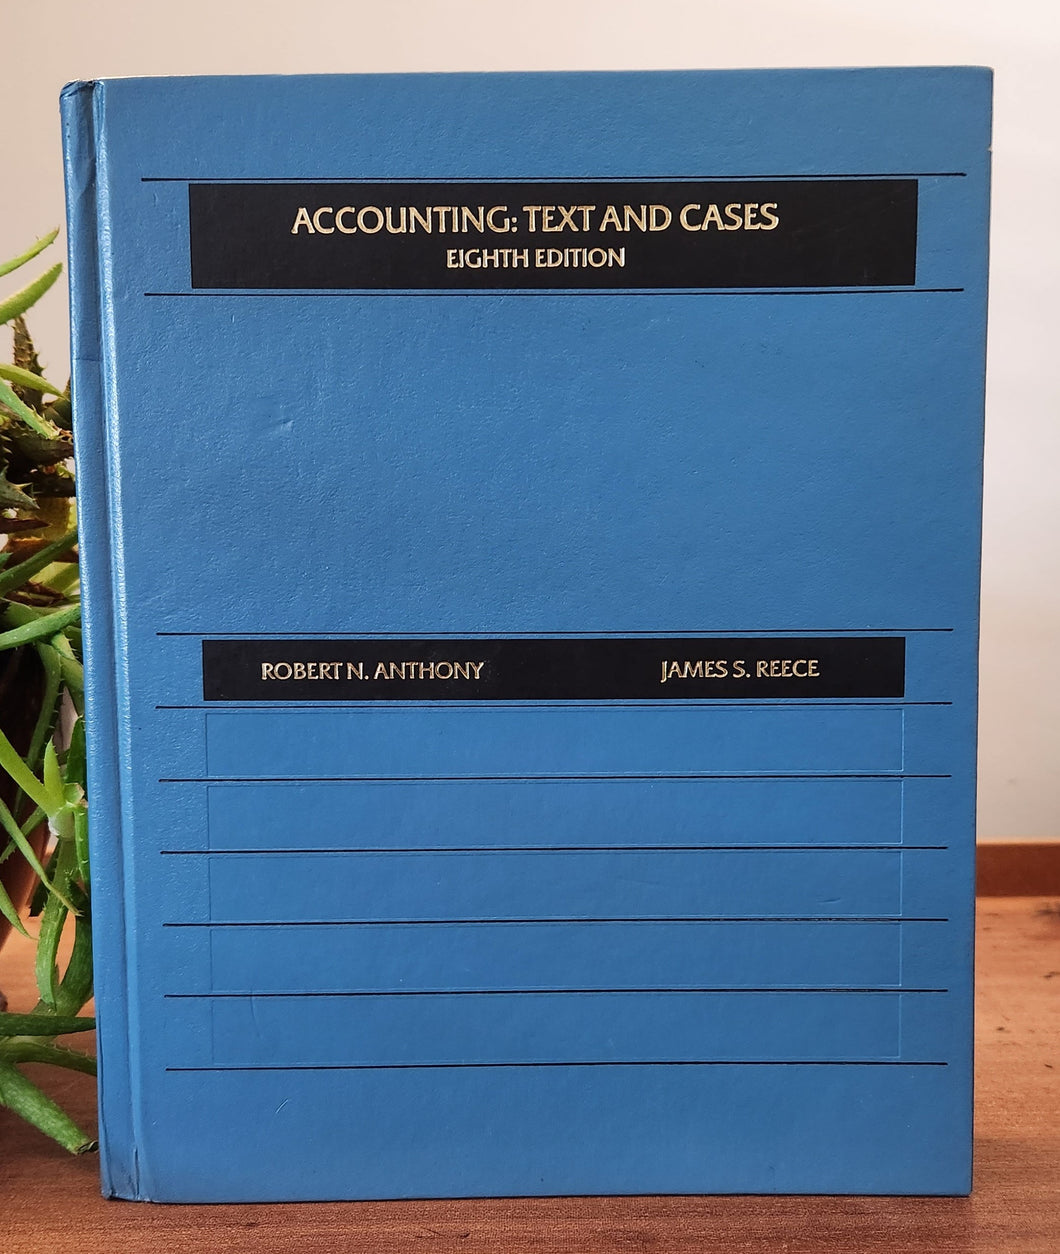 Accounting: Text and Cases by Robert N. Anthony, James S. Reece (Eighth Edition)